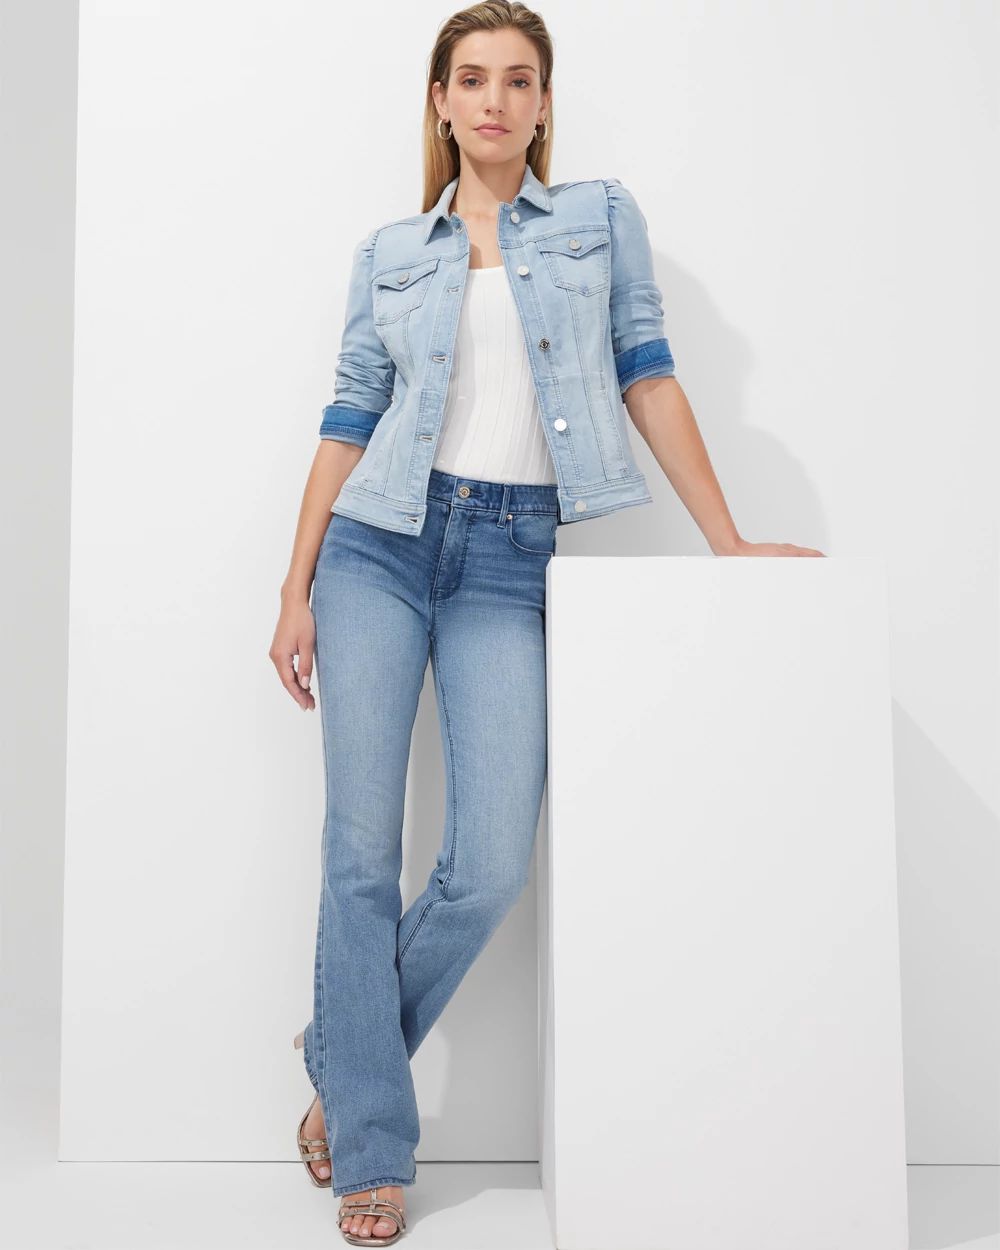 Outlet WHBM Puff-Shoulder Denim Jacket click to view larger image.